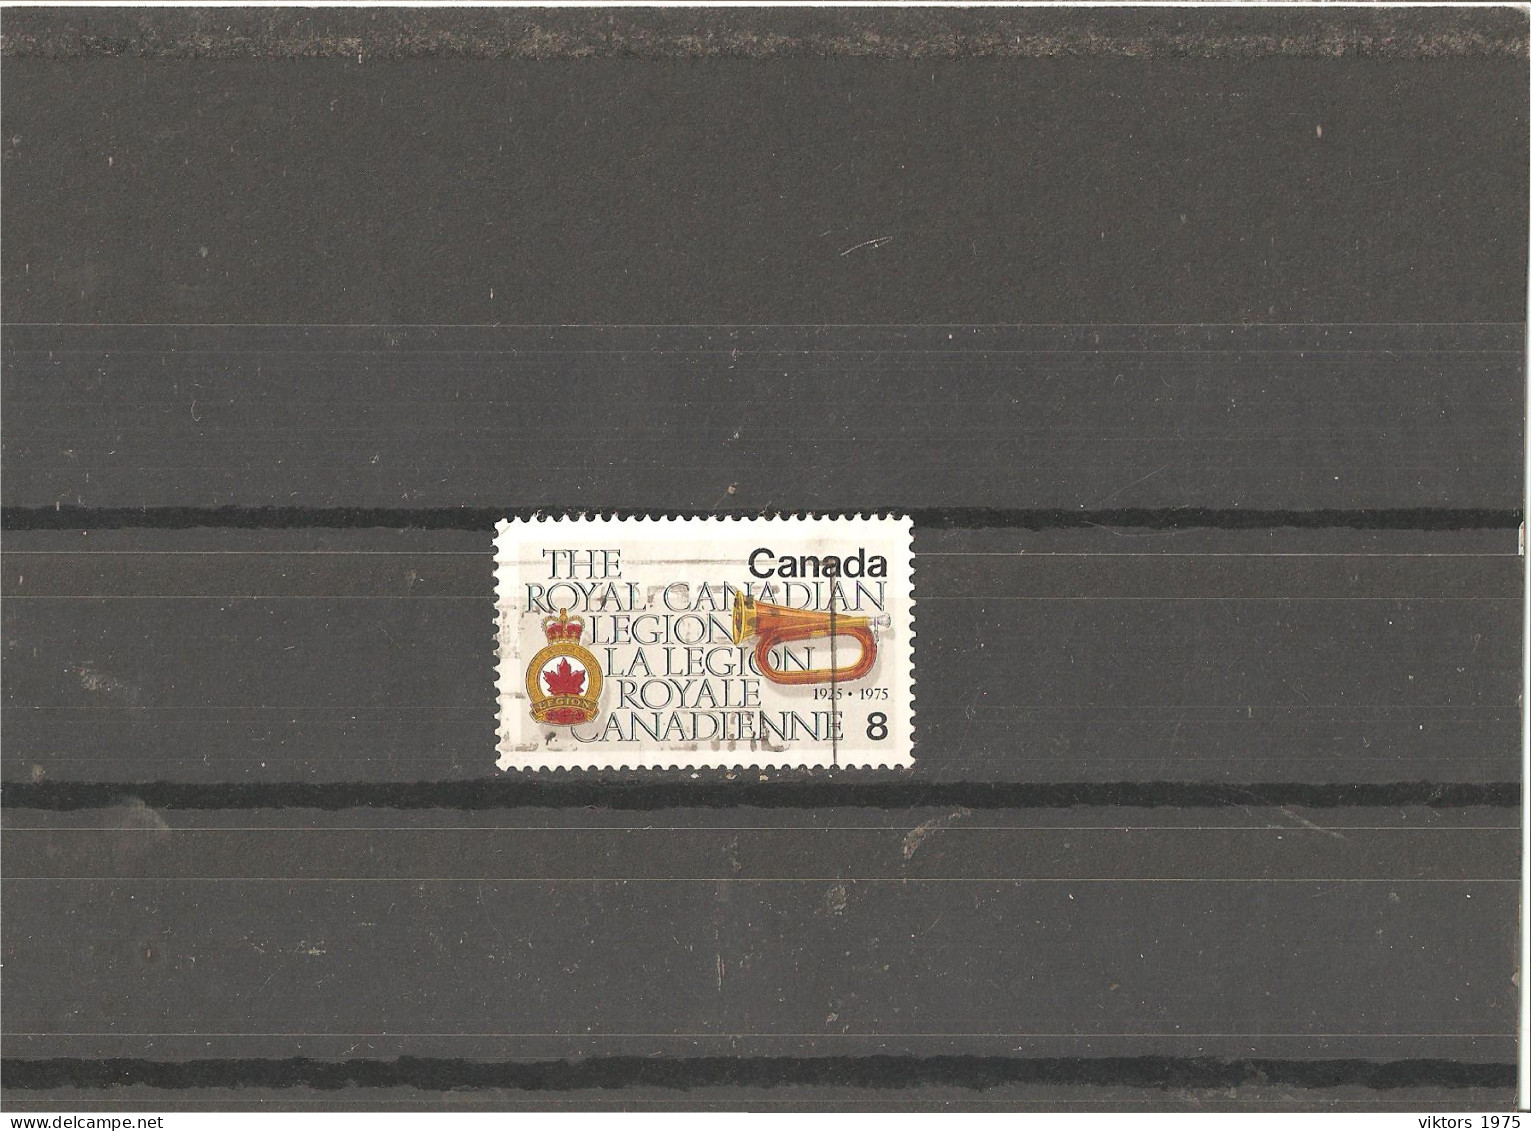 Used Stamp Nr.741 In Darnell Catalog - Oblitérés